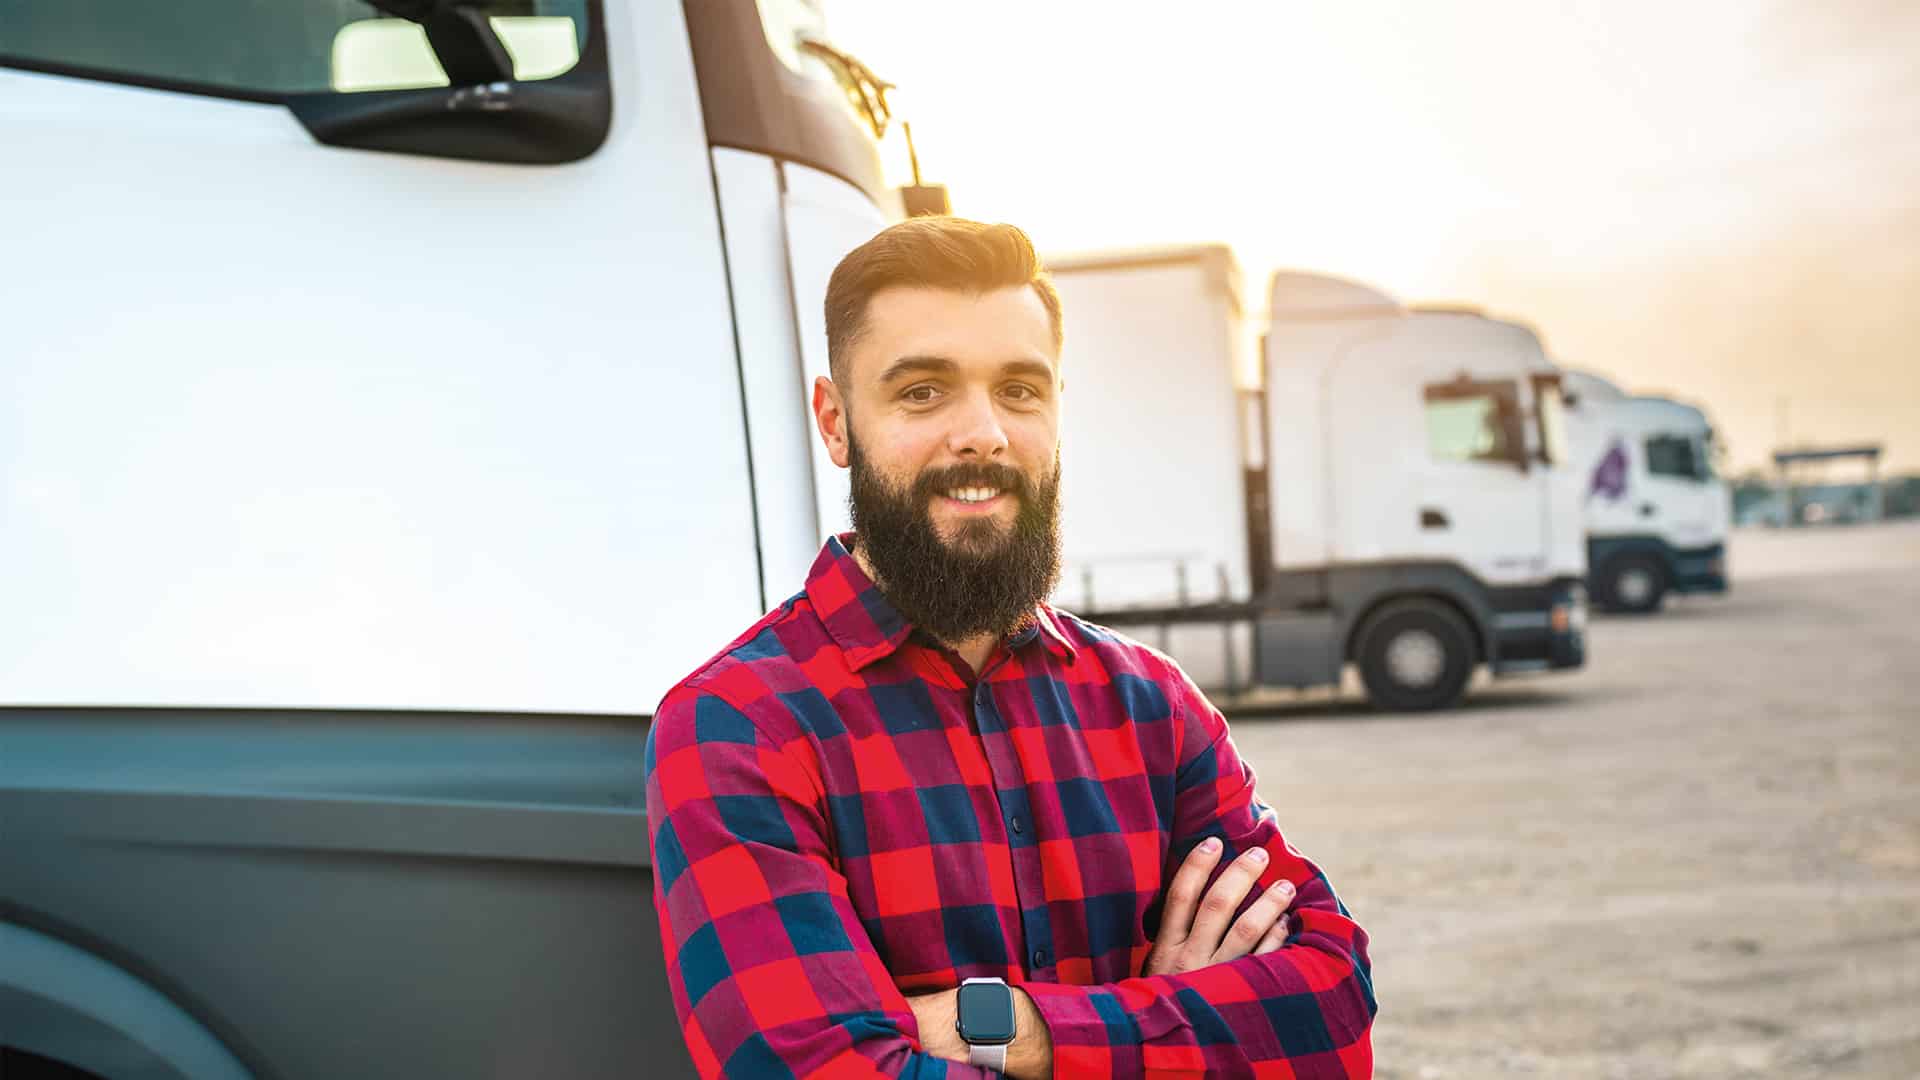 A photo of a man with a beard stood in front of trucks.